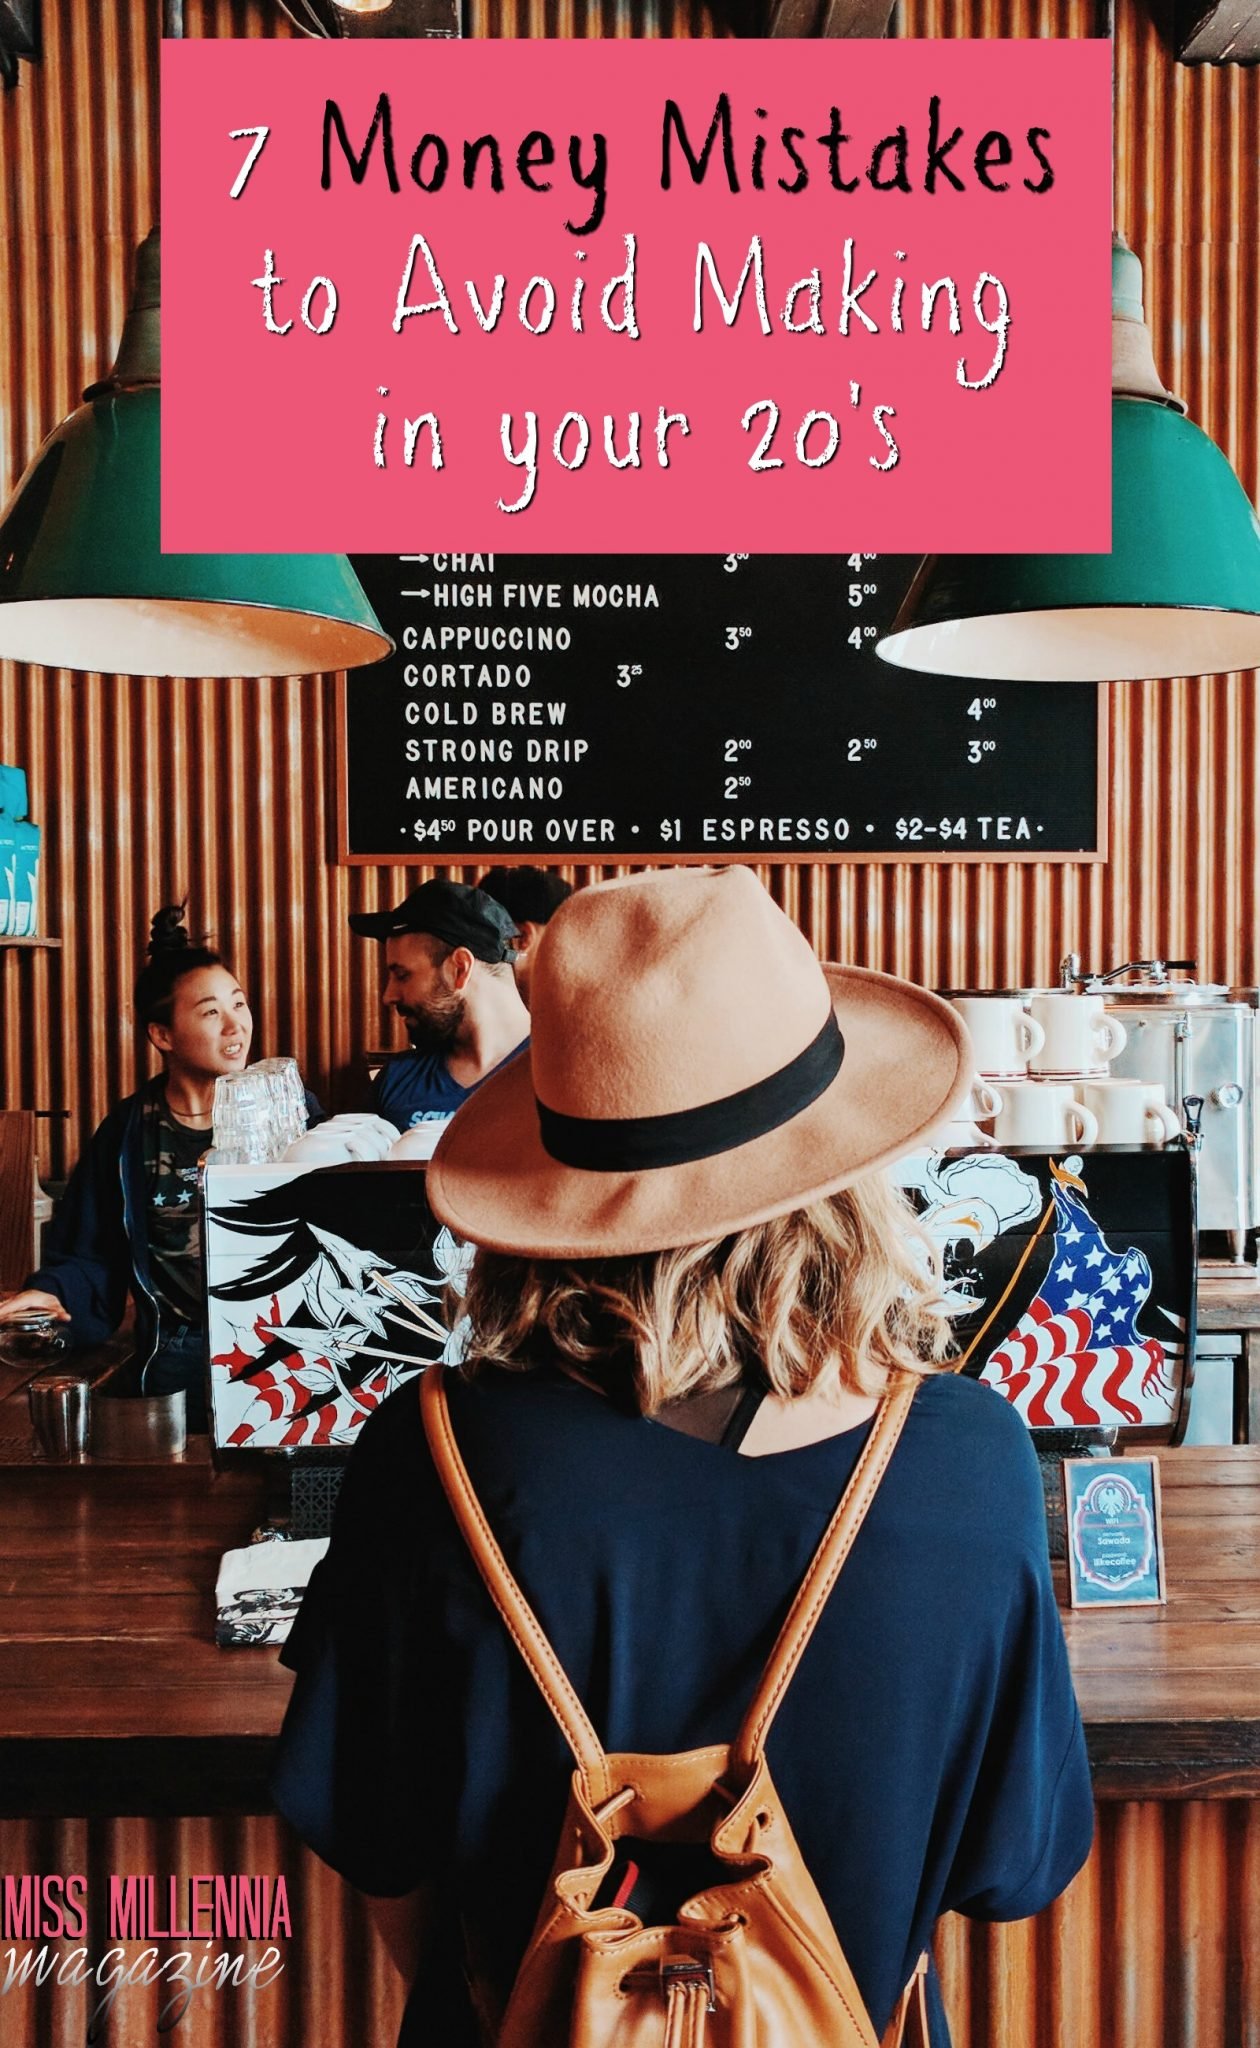 7 Money Mistakes to Avoid Making in your 20's